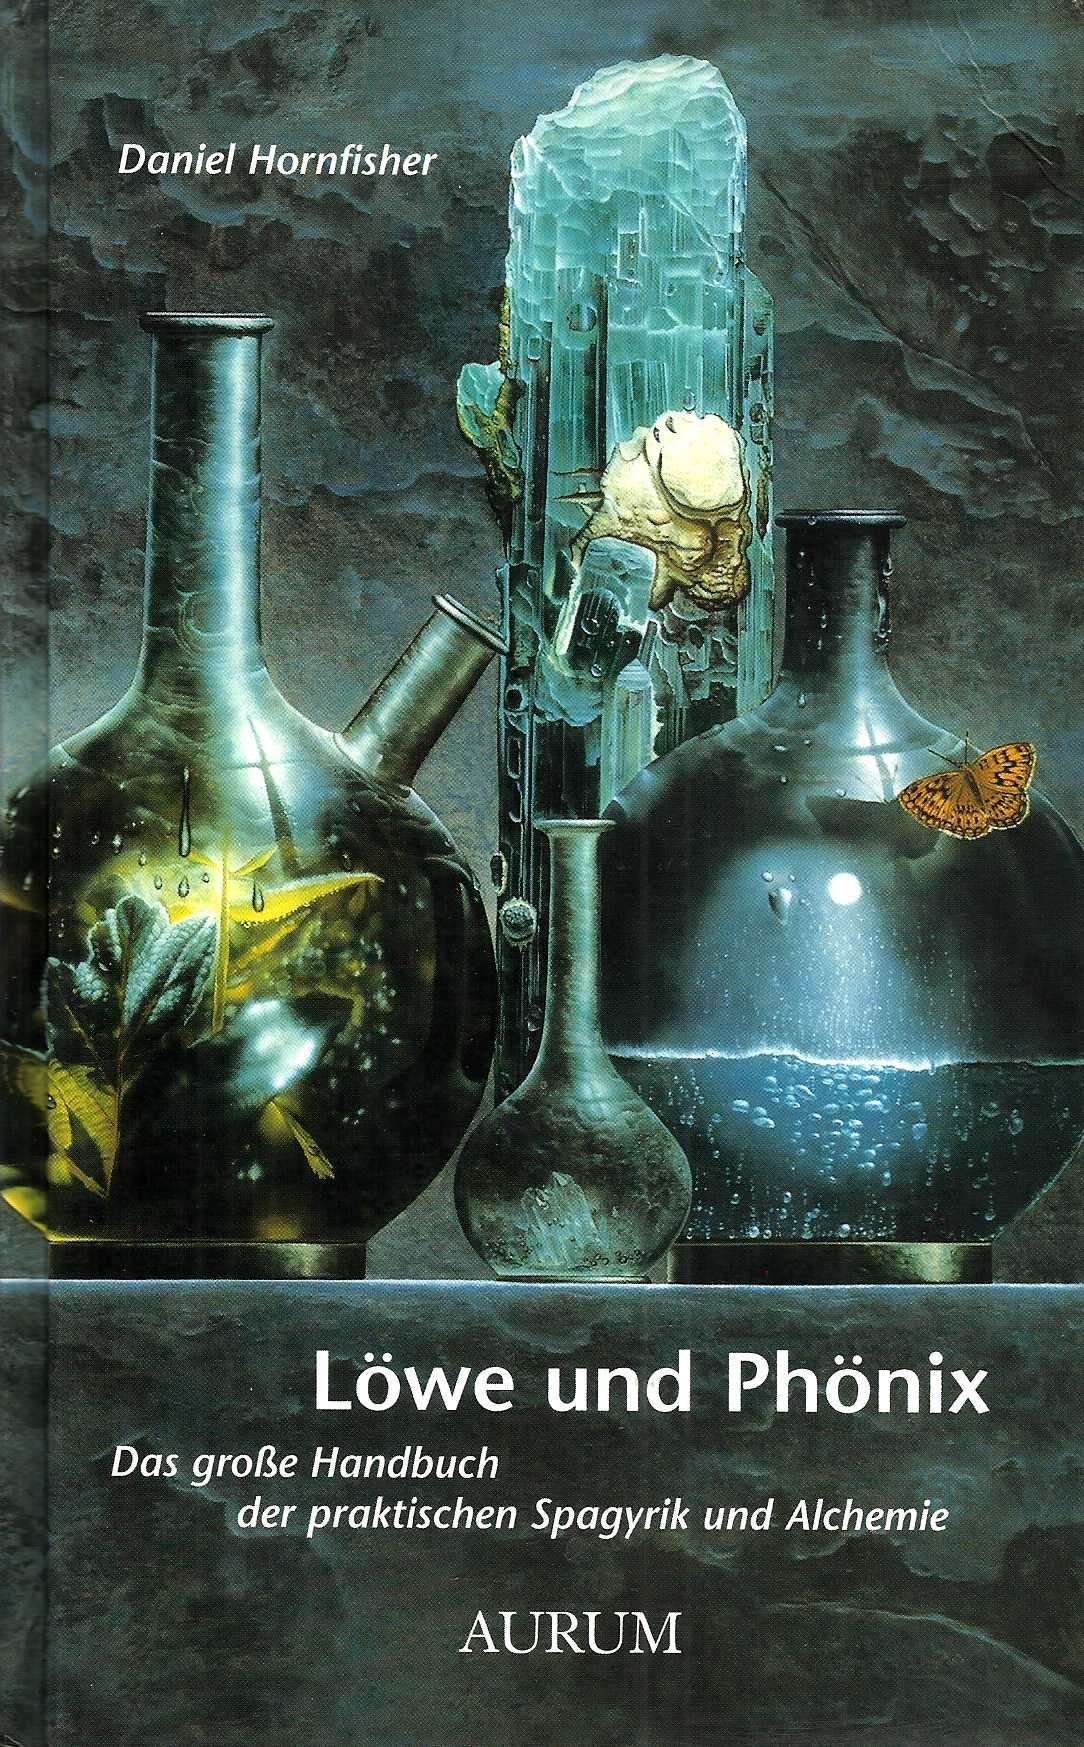 Book cover for "Löwe und Phönix" (engliAH: Lion and Phoenix) by Daniel Hornfisher. Appered in 1998 in the German publishing house "Aurum Verlag"